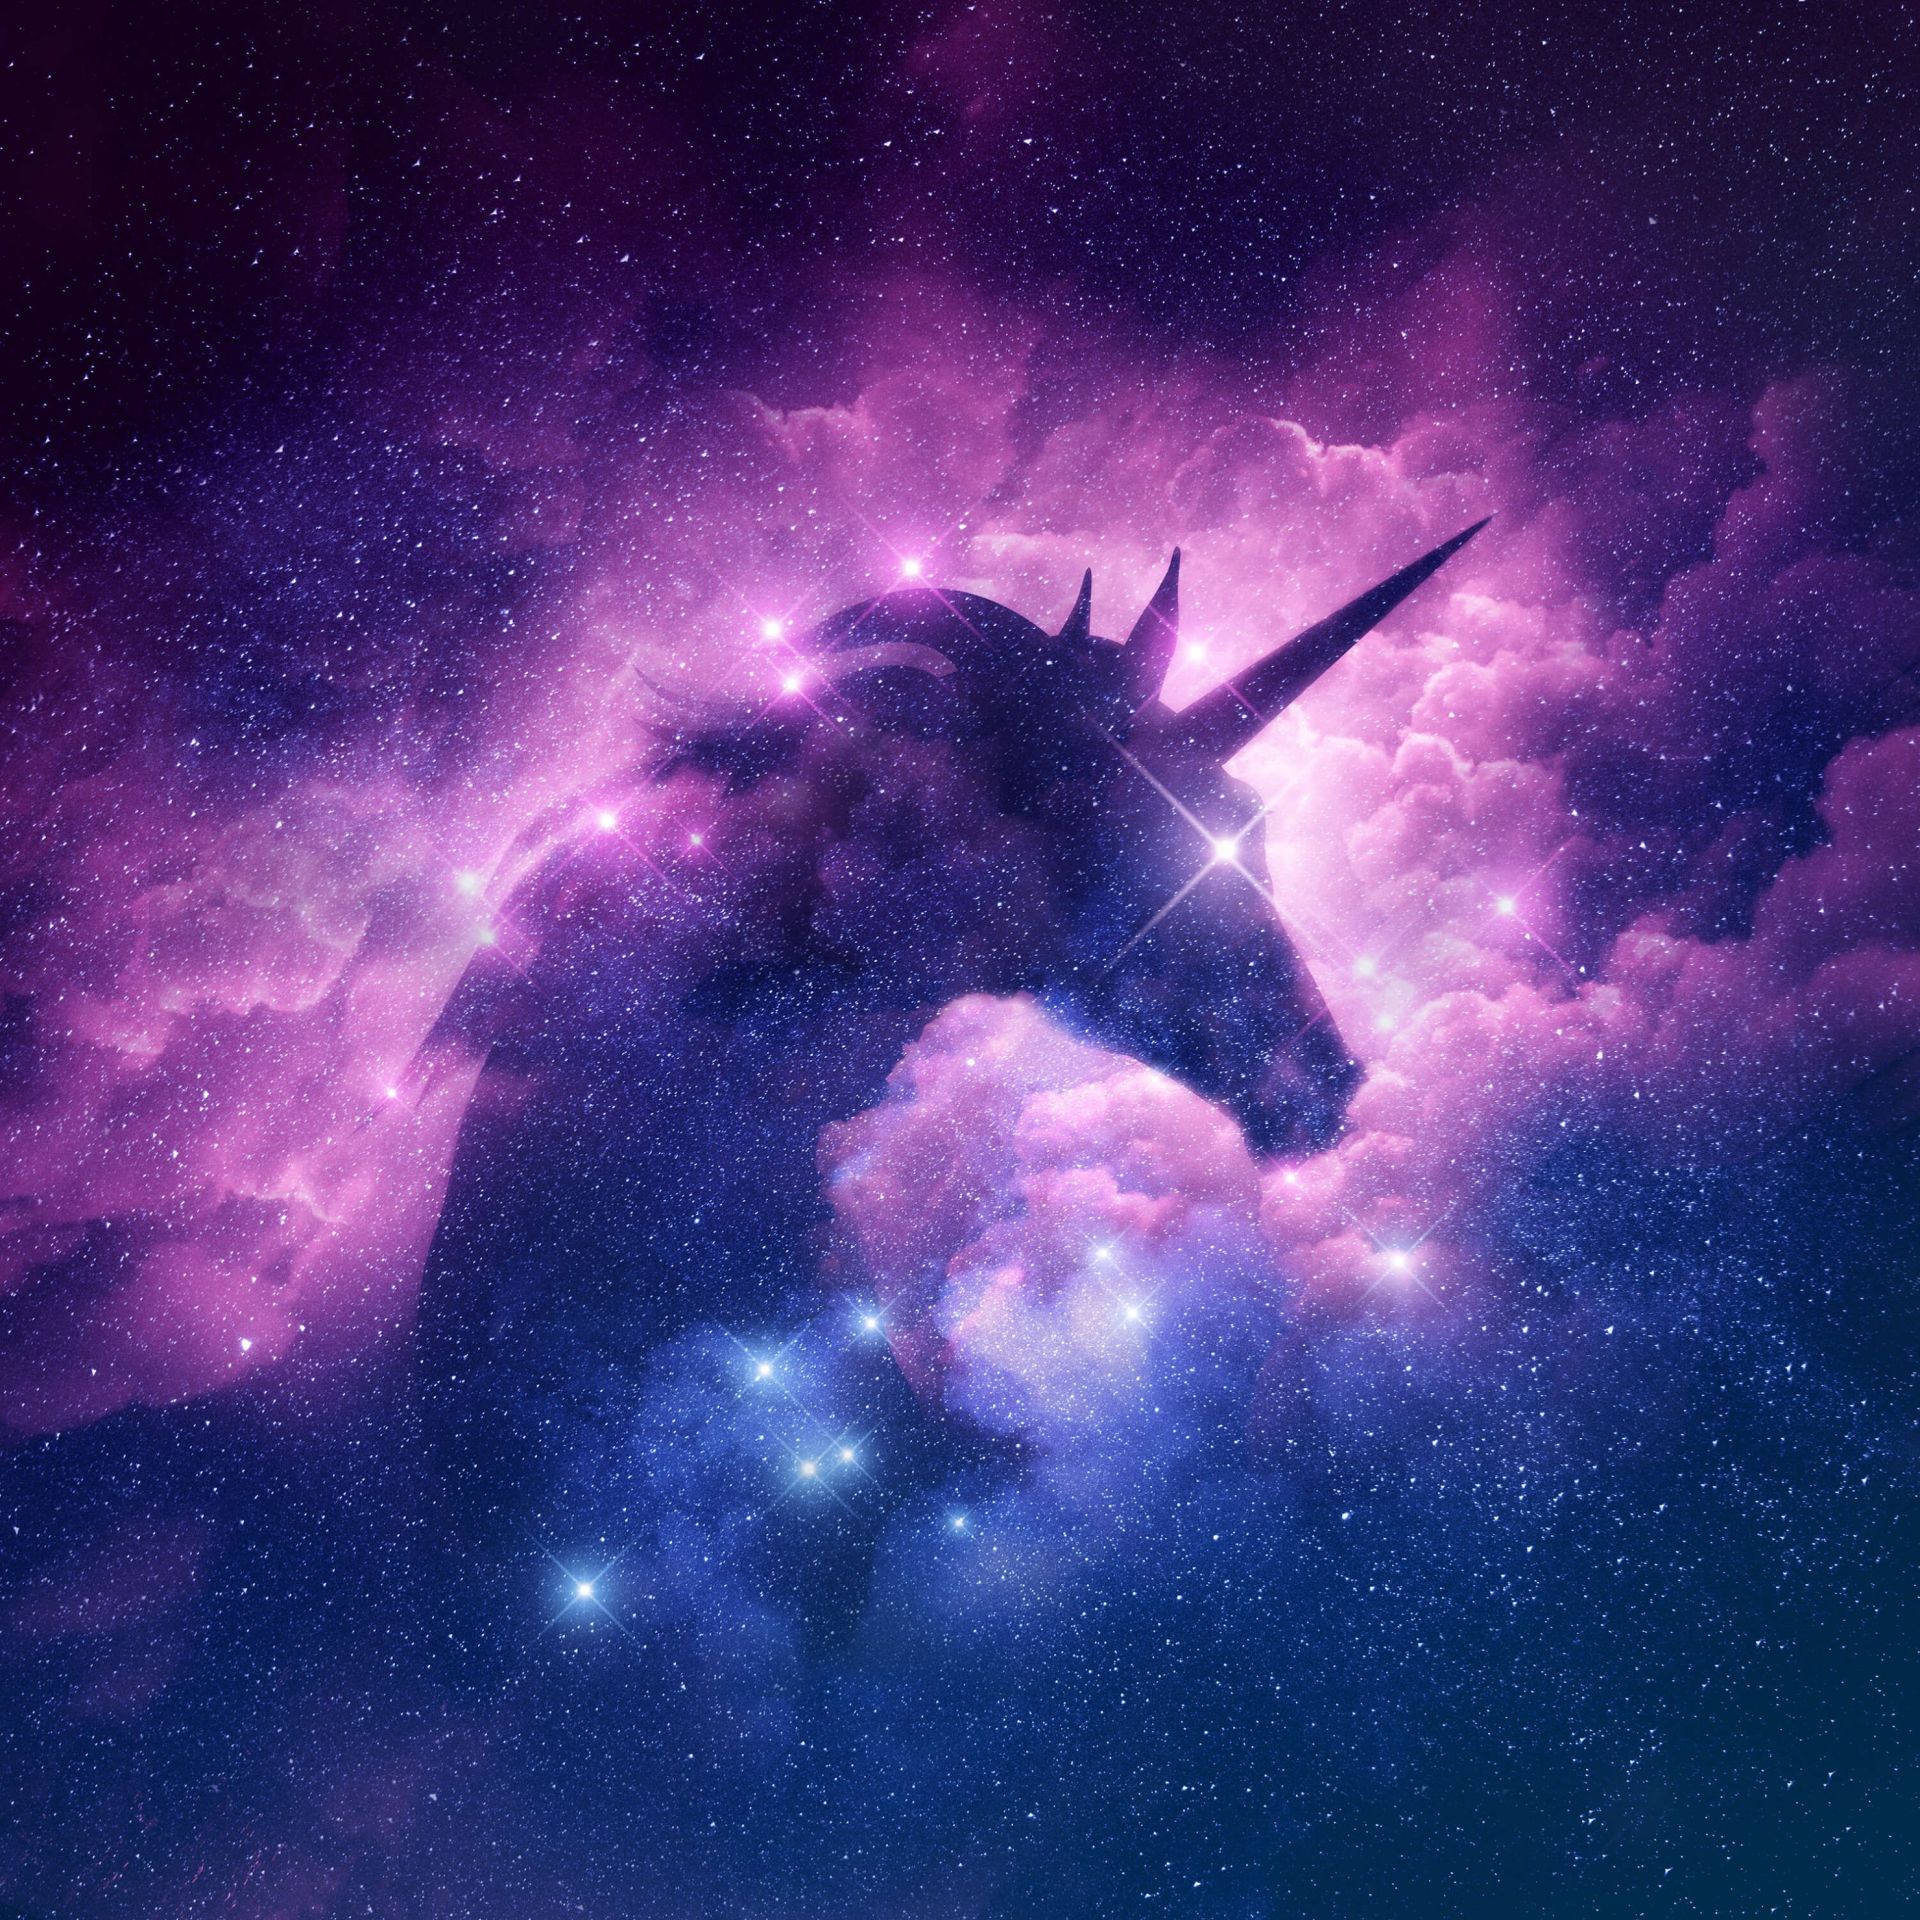 Download Galaxy Unicorn Wallpaper by NikkiFrohloff - 49 - Free on ZEDGE™  now. Browse millions o… | Unicorn wallpaper cute, Unicorn wallpaper, Pink unicorn  wallpaper